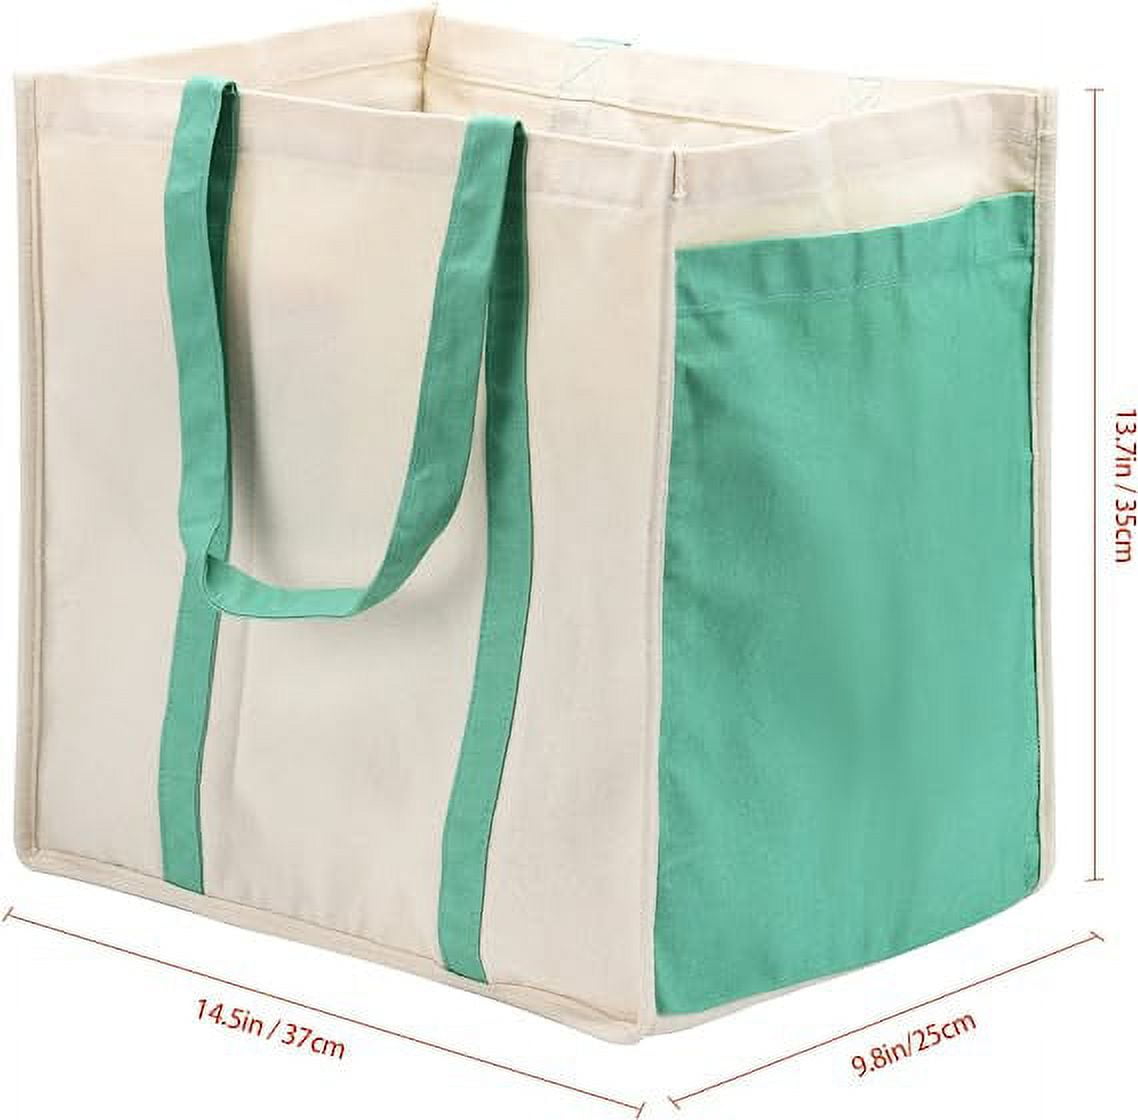 Sweetude 6 Pieces Extra Large Canvas Tote Bag Utility Heavy Duty Grocery